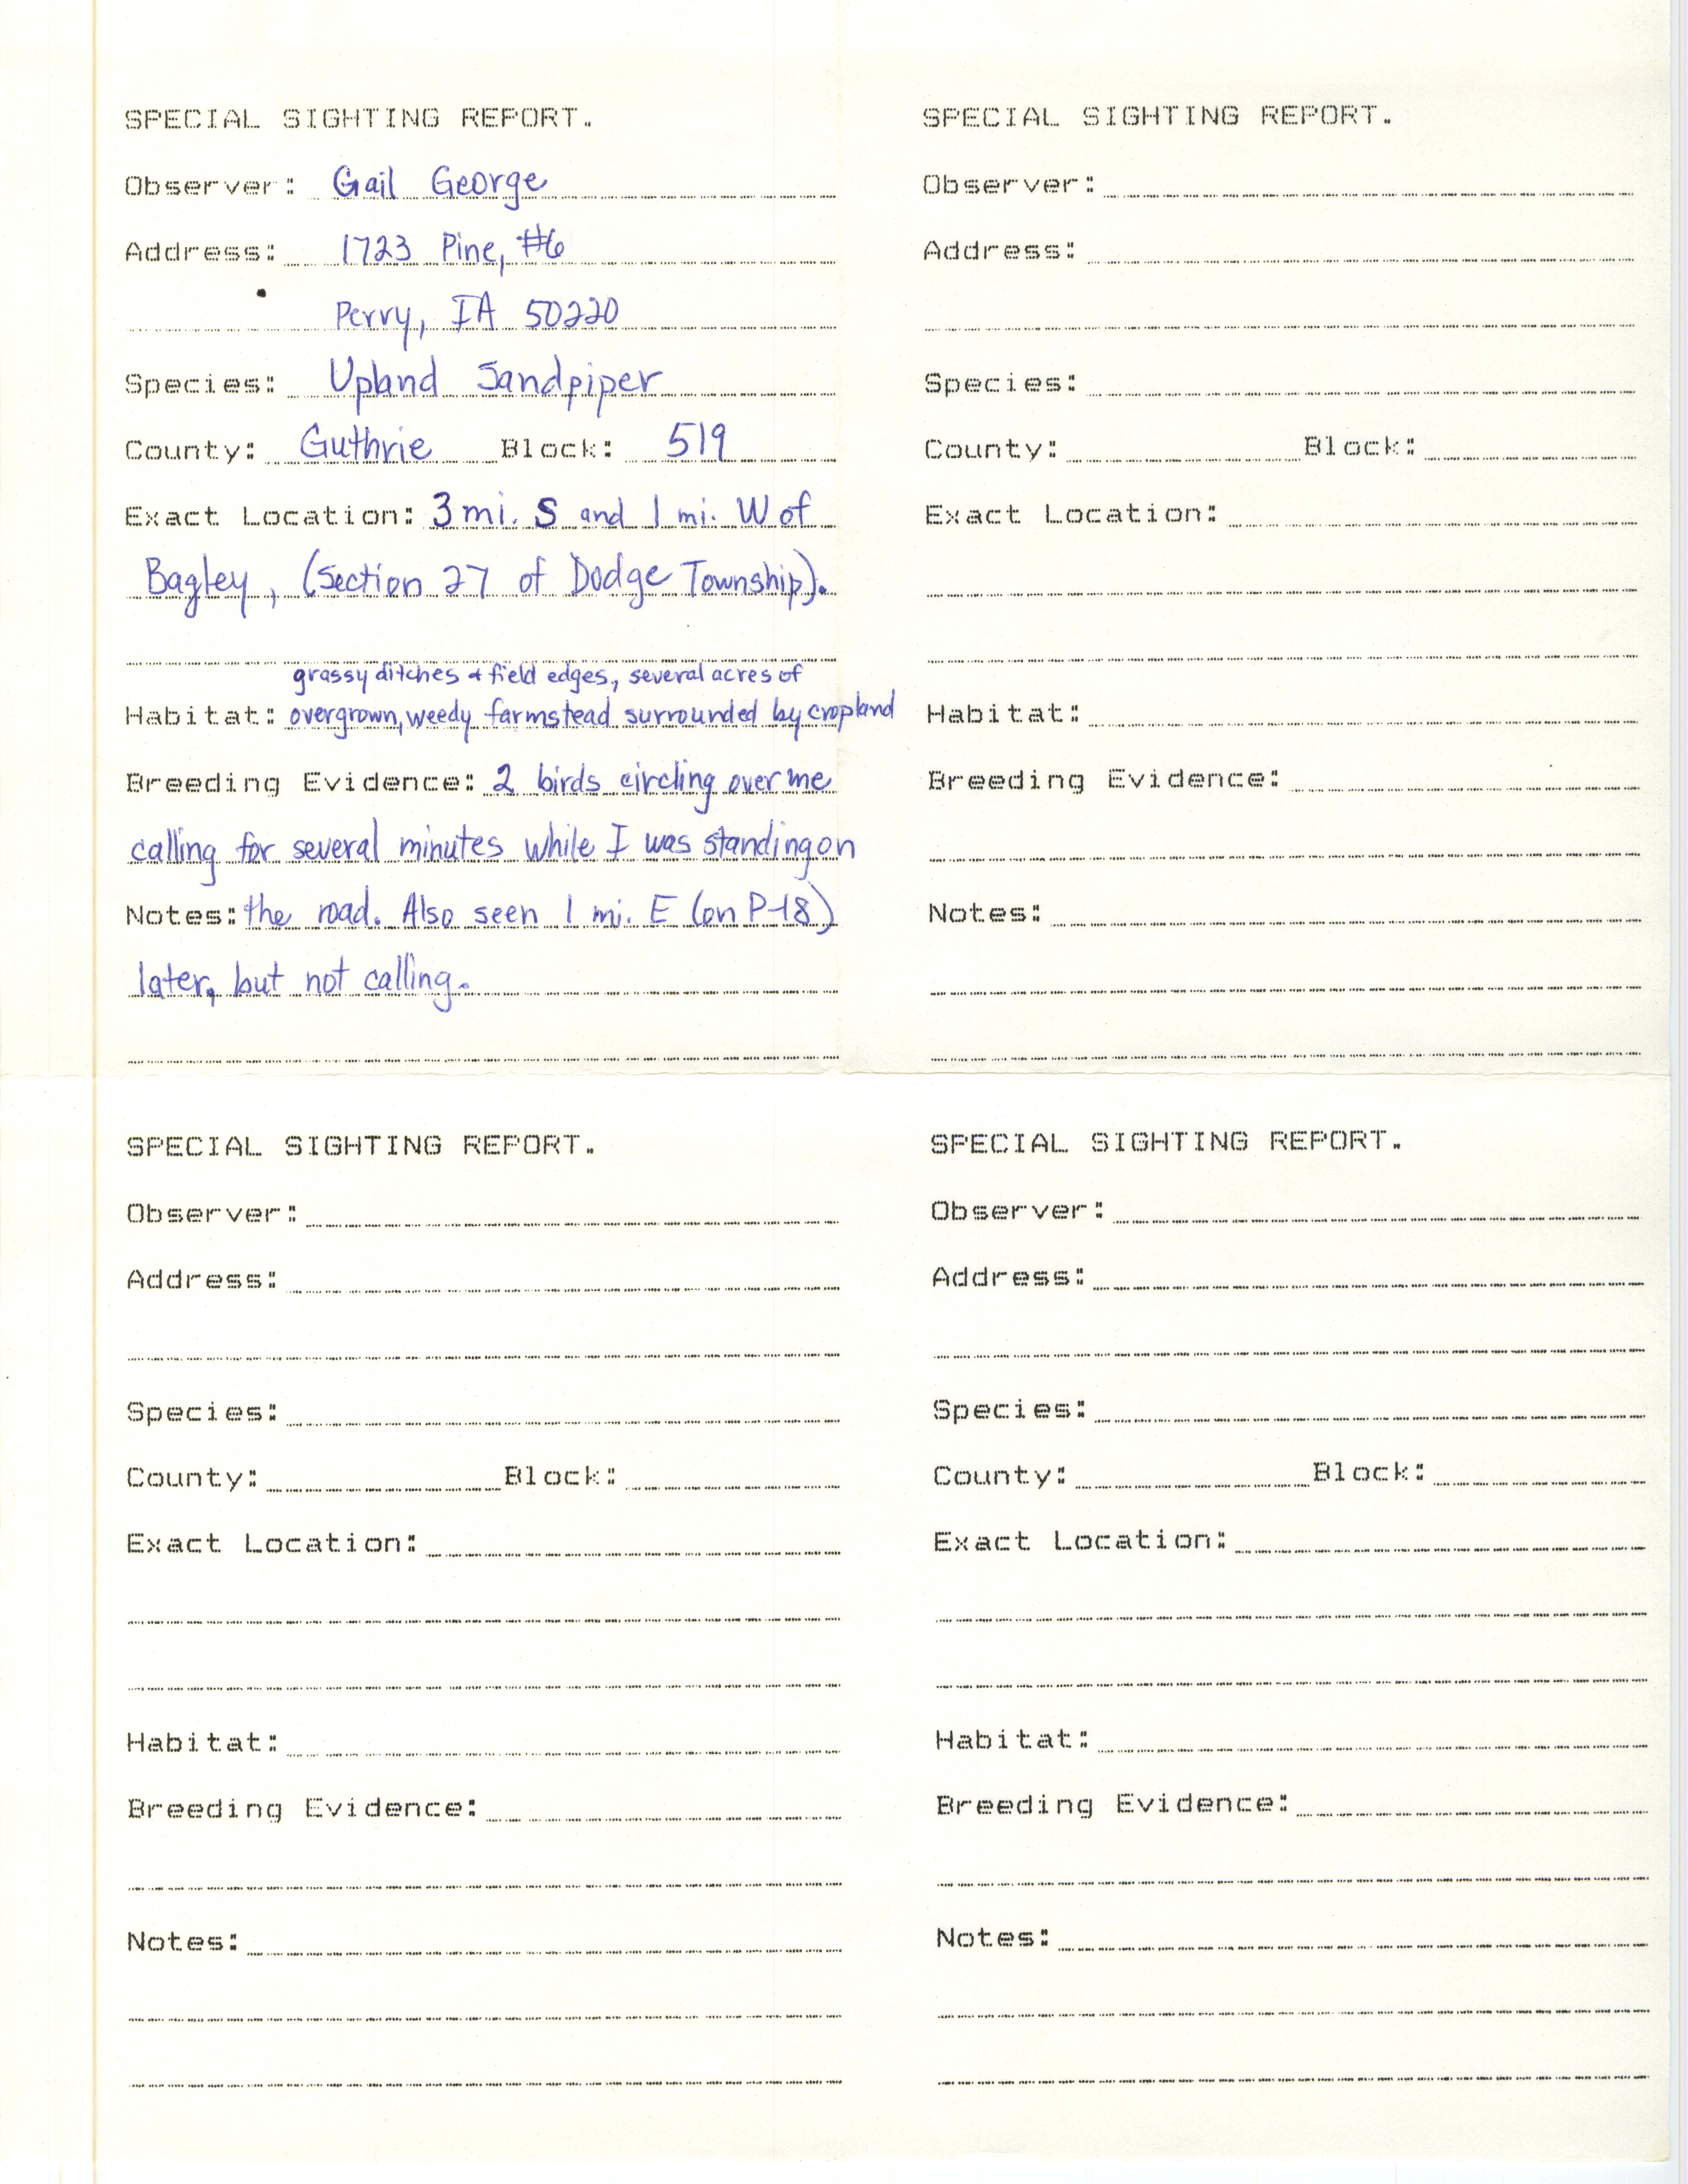 Special sighting report, Gail George, summer 1987